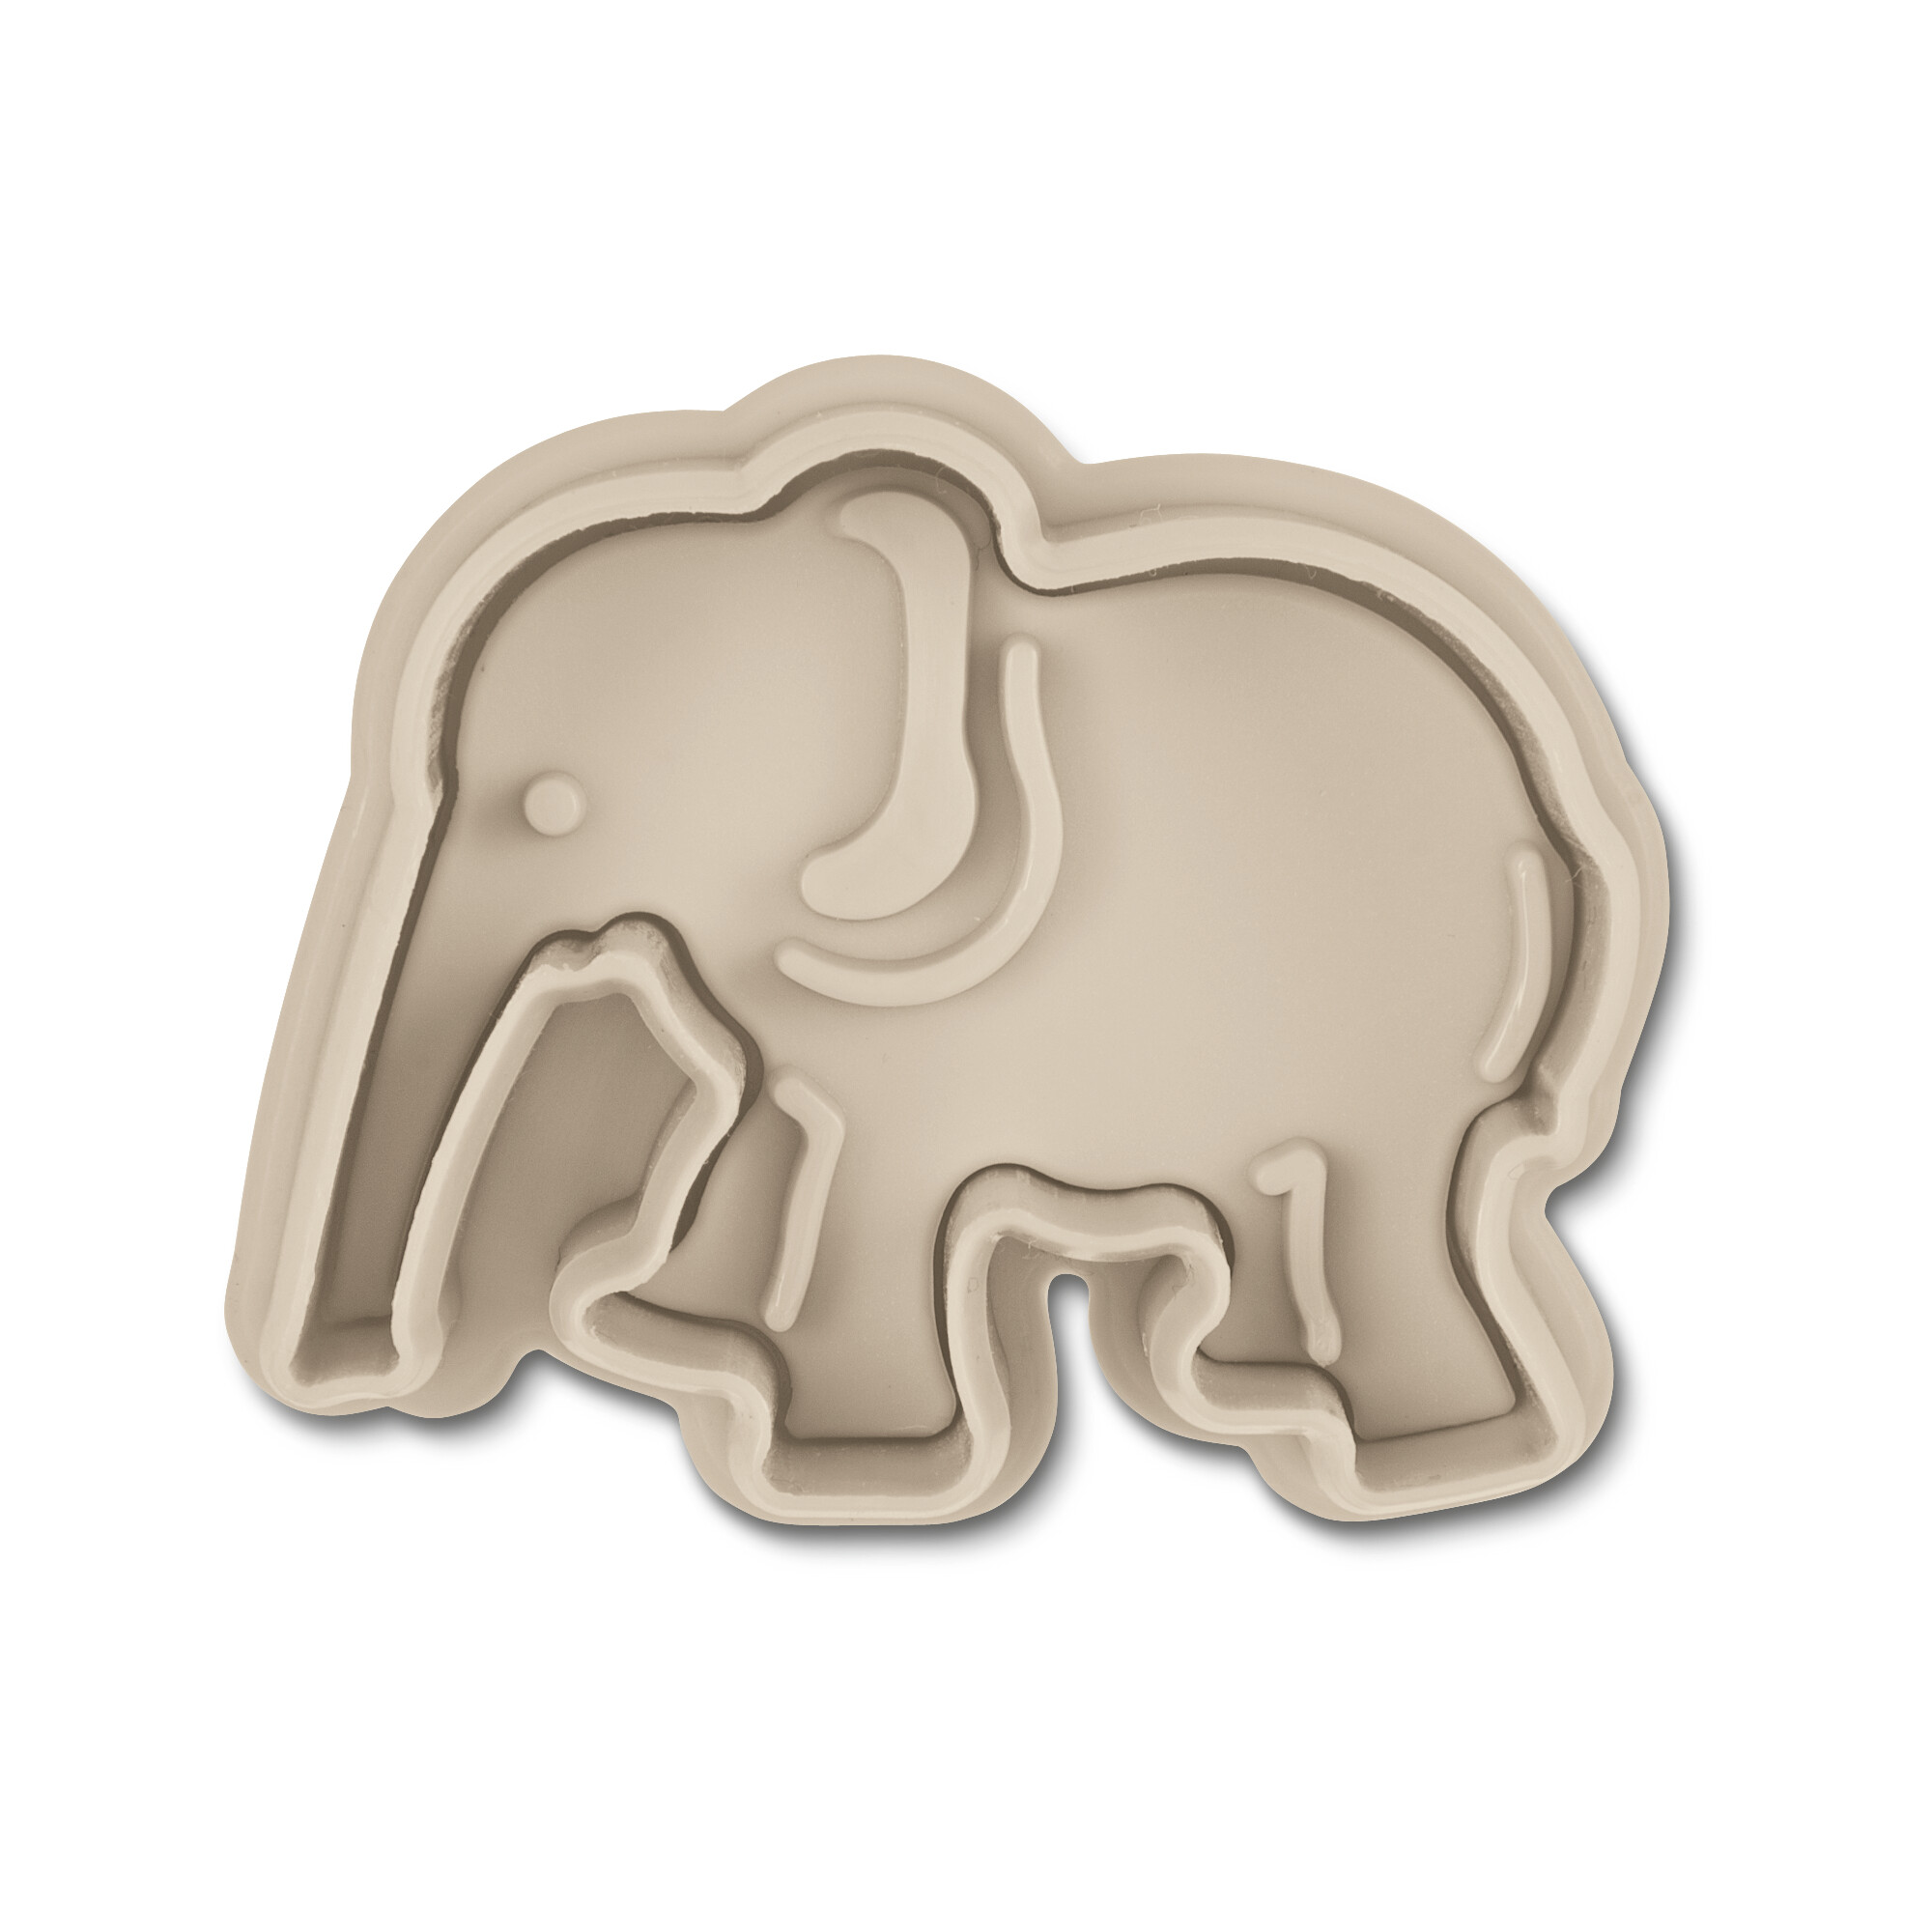 Cookie cutter with stamp and ejector – Elephant